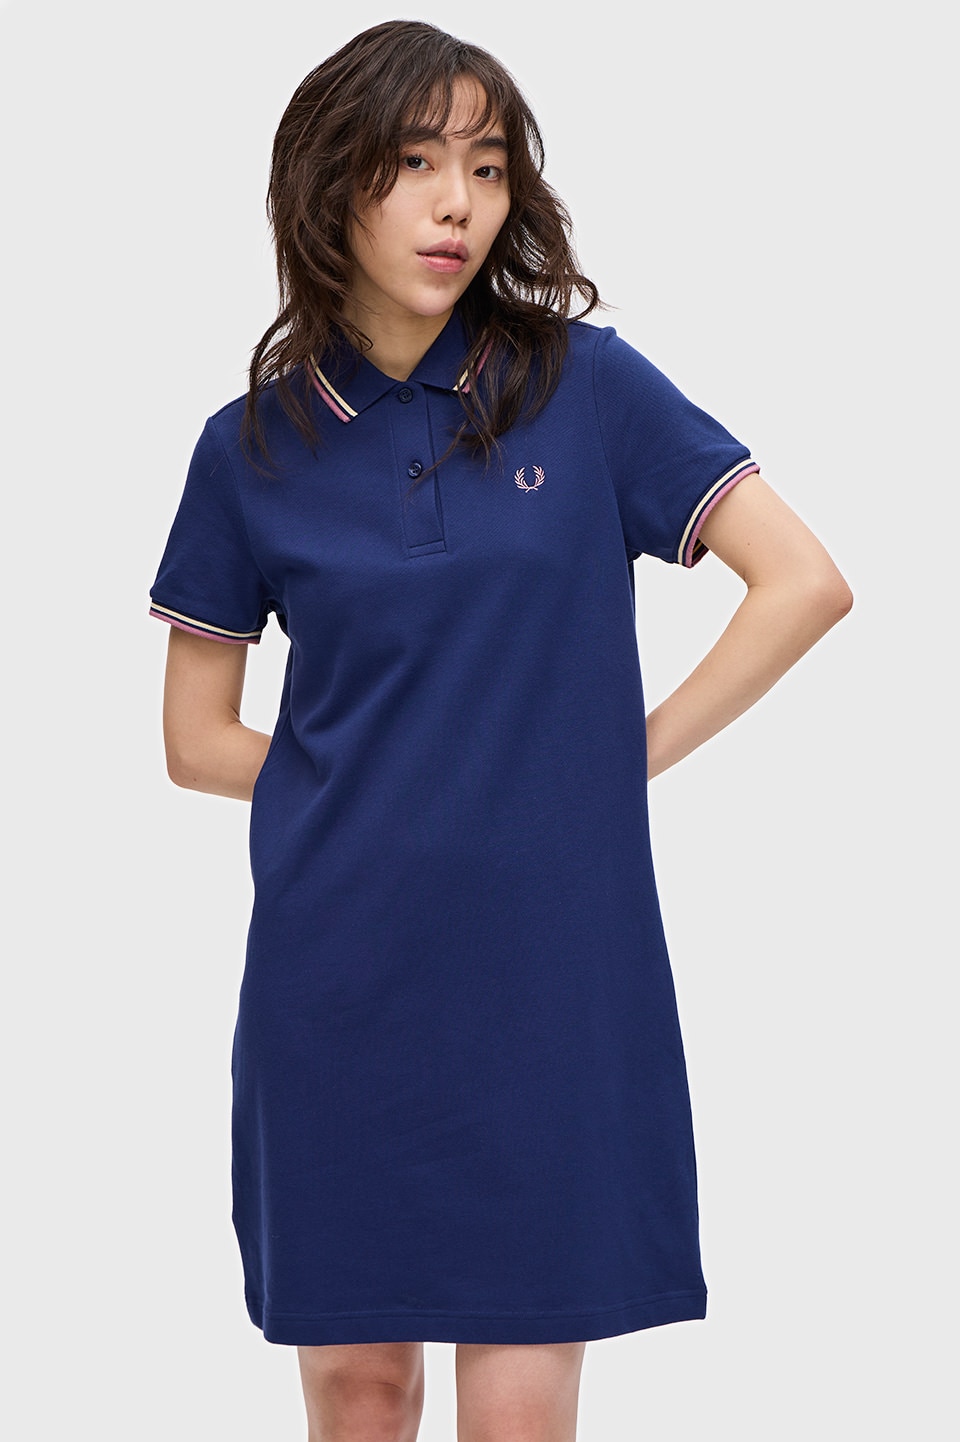 Twin Tipped Fred Perry Dress|FRED PERRY(フレッドペリー)の通販 